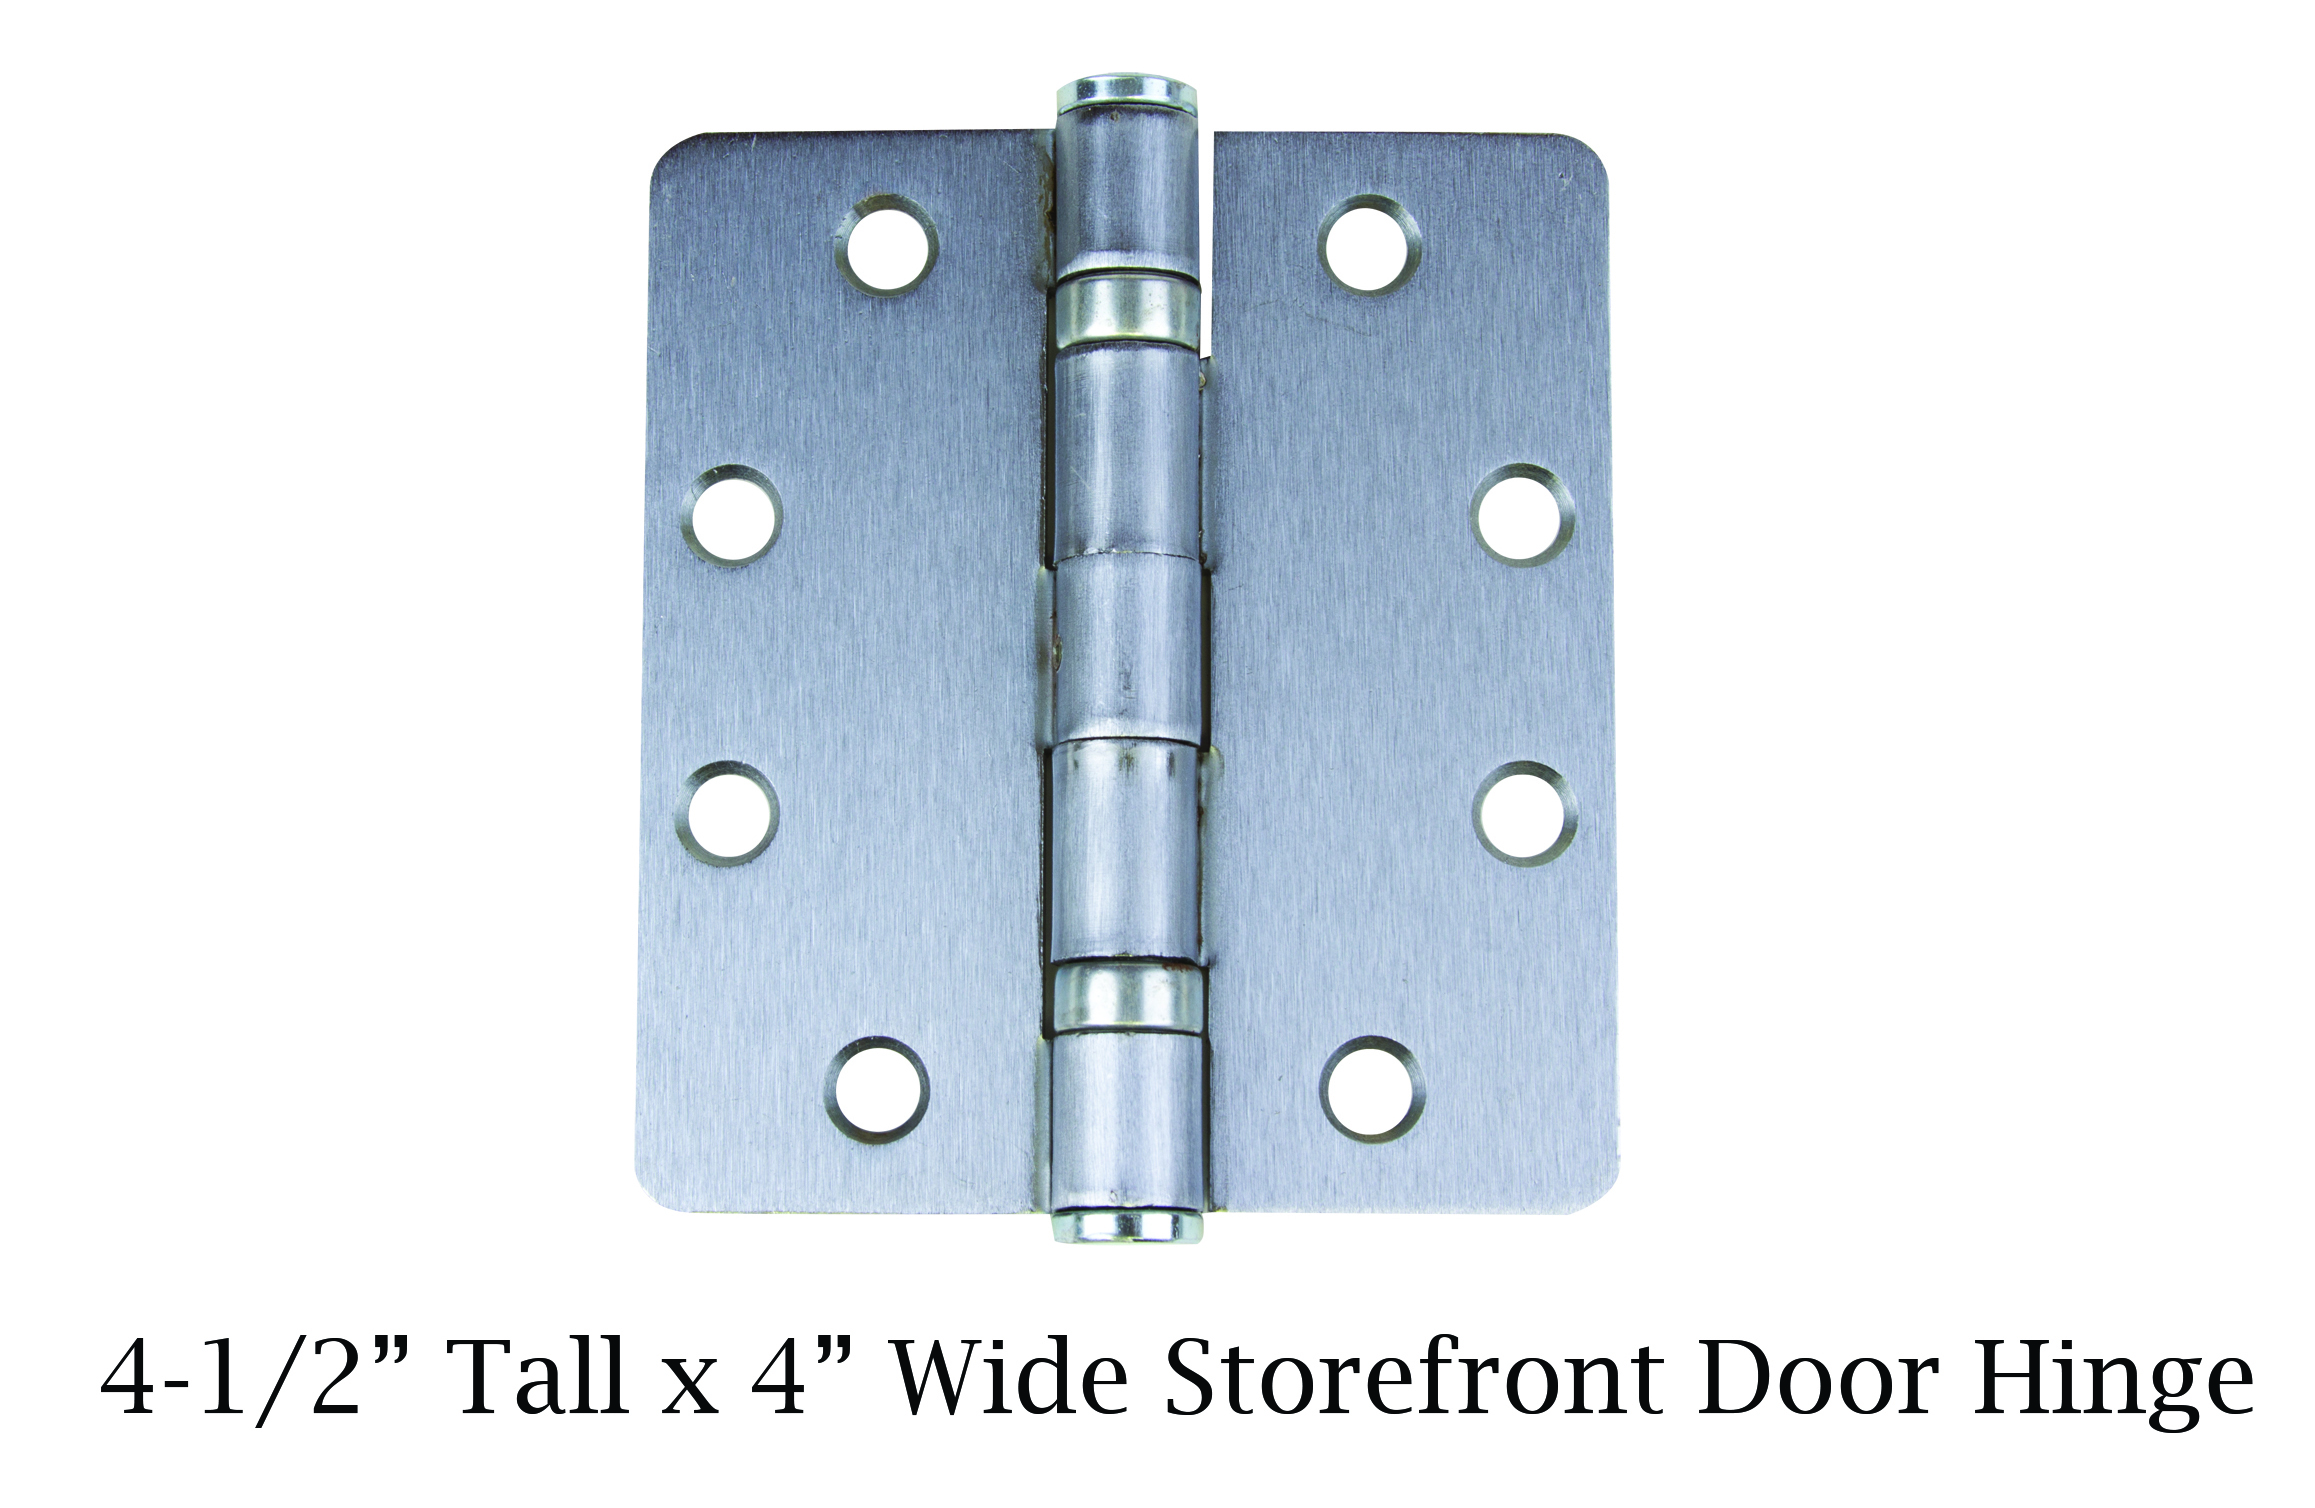 How To Replace A Storefront Door Hinge